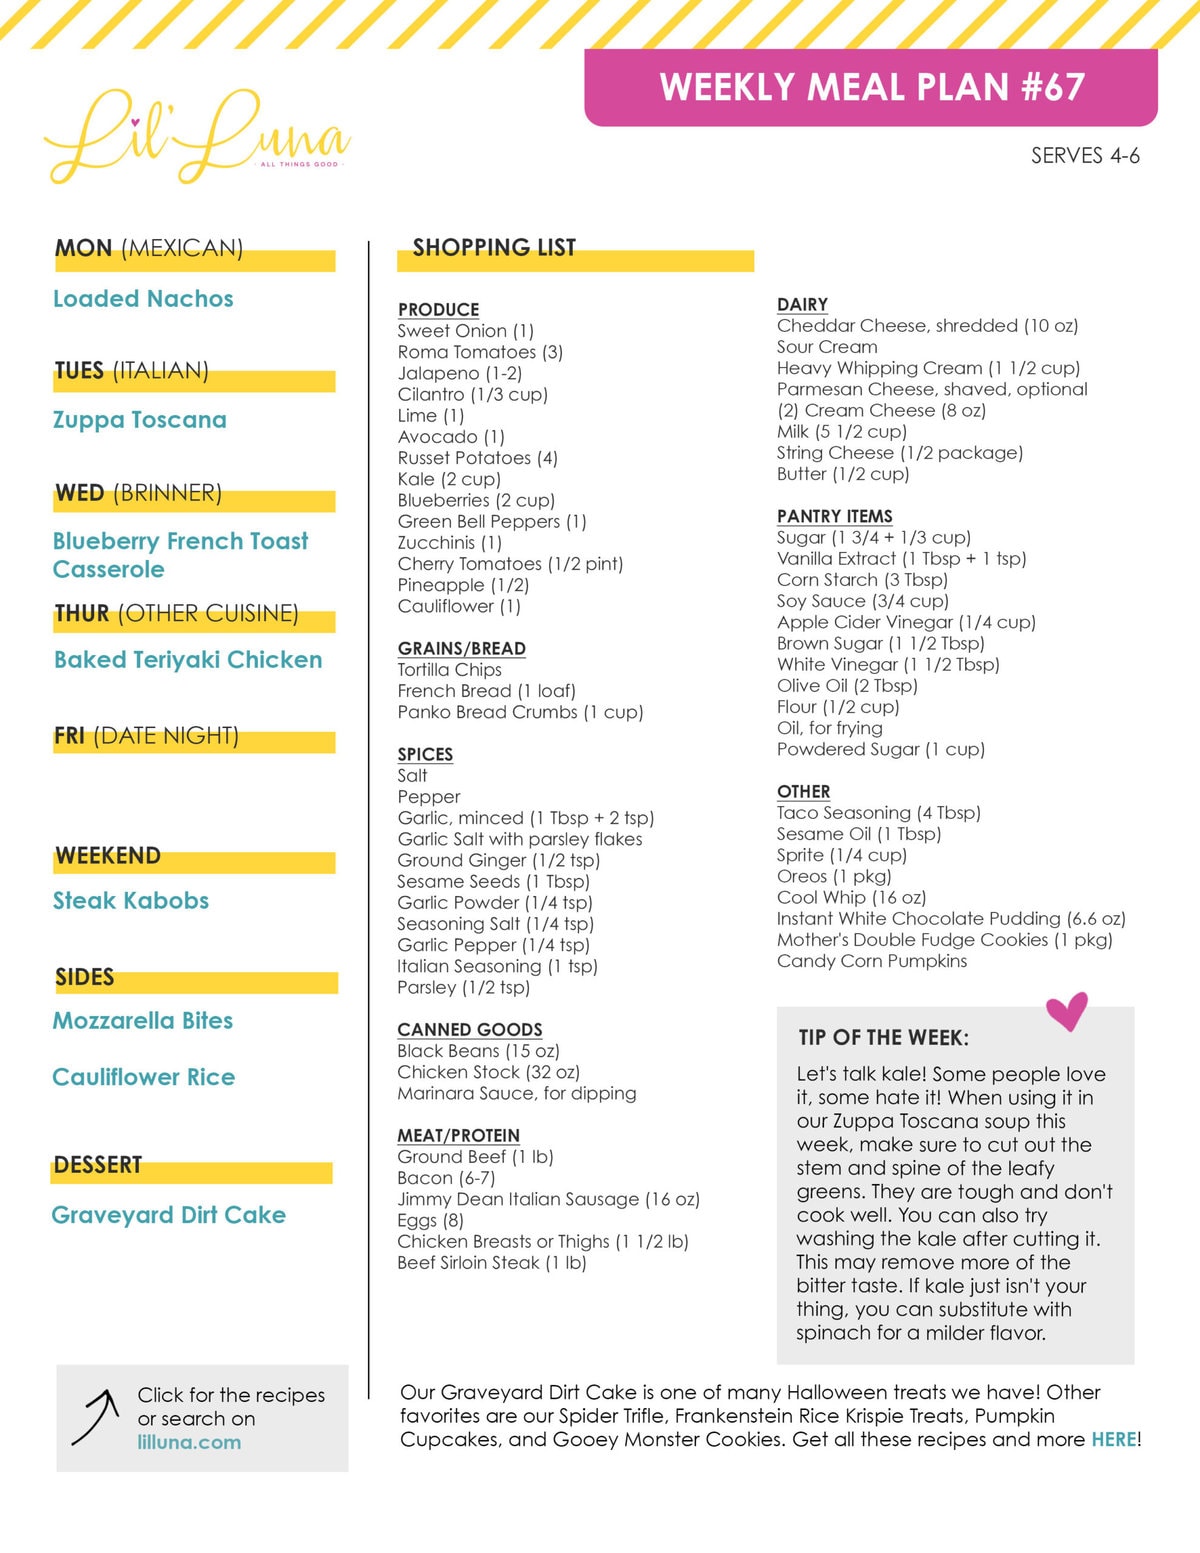 Printable version of Meal Plan #67 with grocery list.